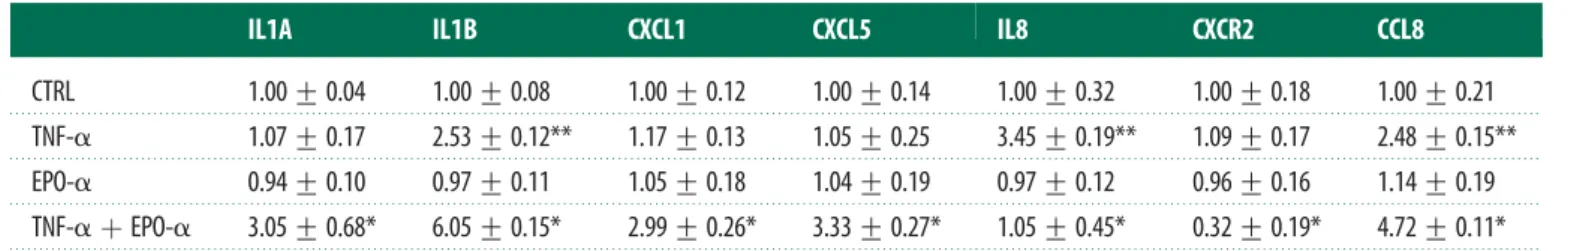 Table 4. Changes in the expression of genes involved in inﬂammation obtained from qPCR analysis.